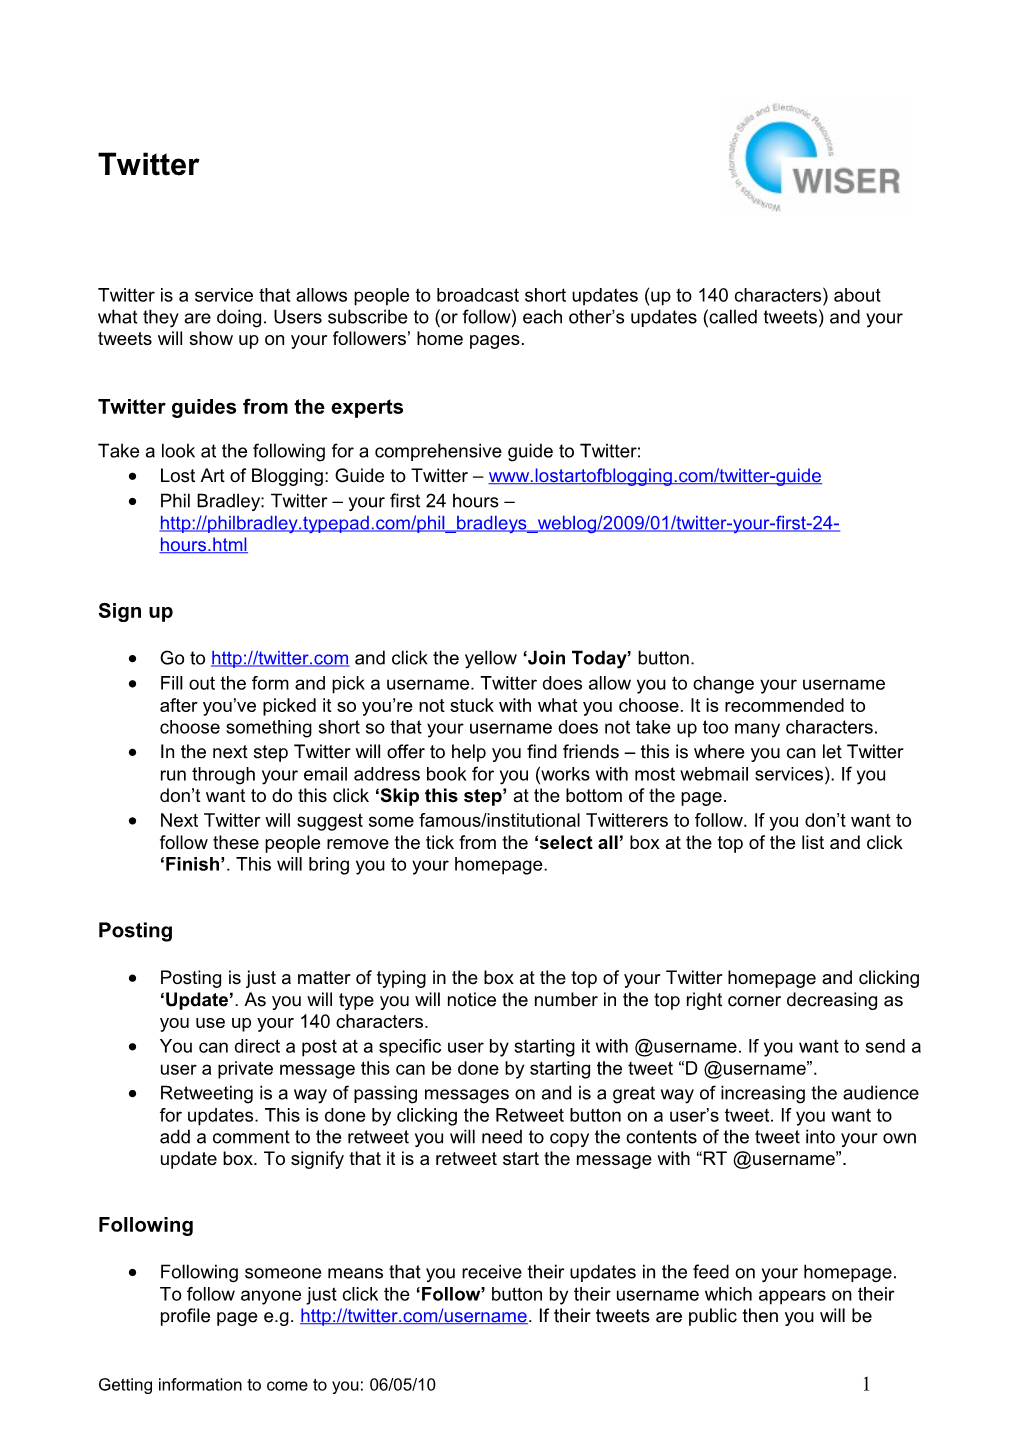 Twitter Guides from the Experts